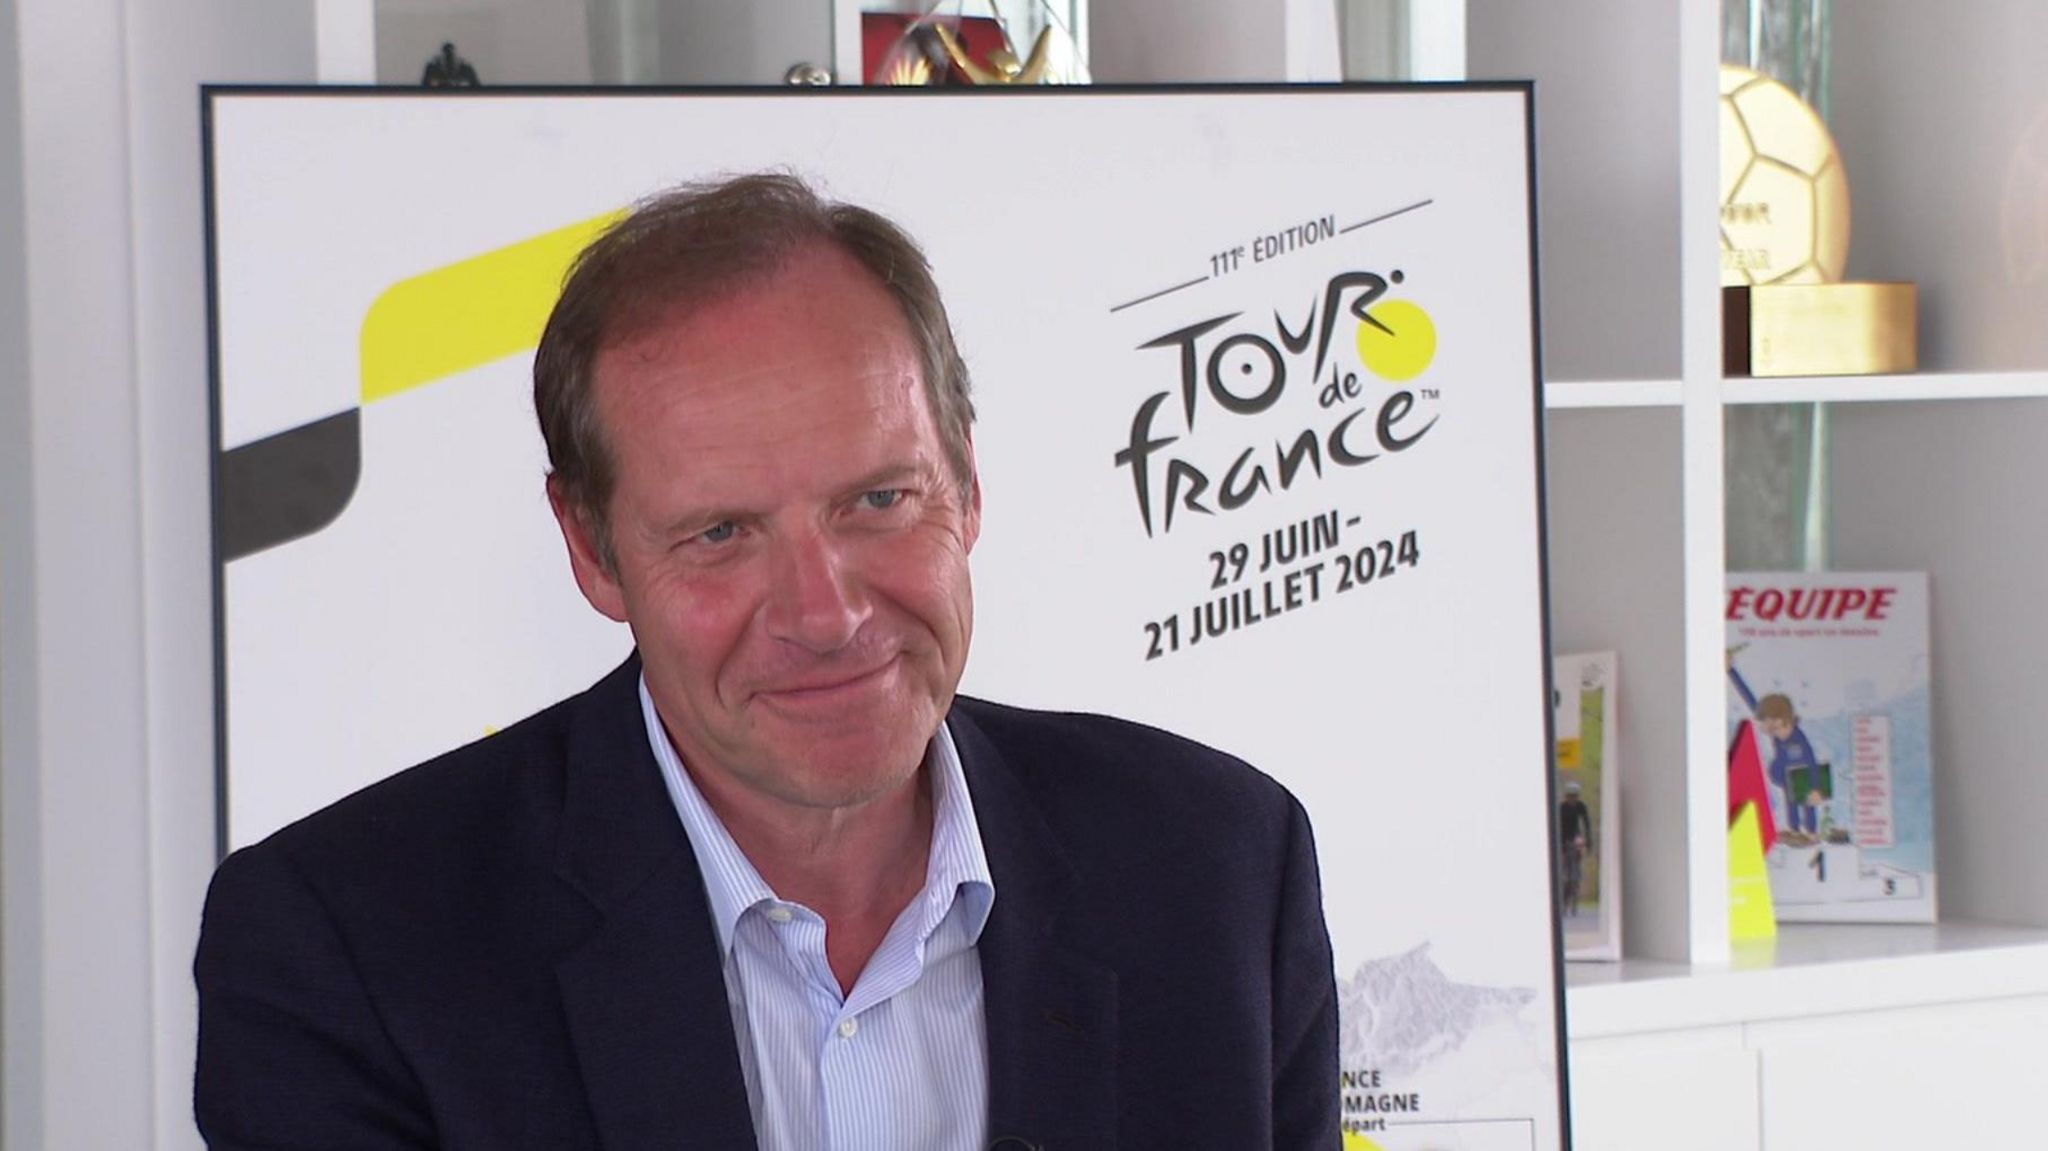 Christian Prudhomme, director of the Tour de France since 2007